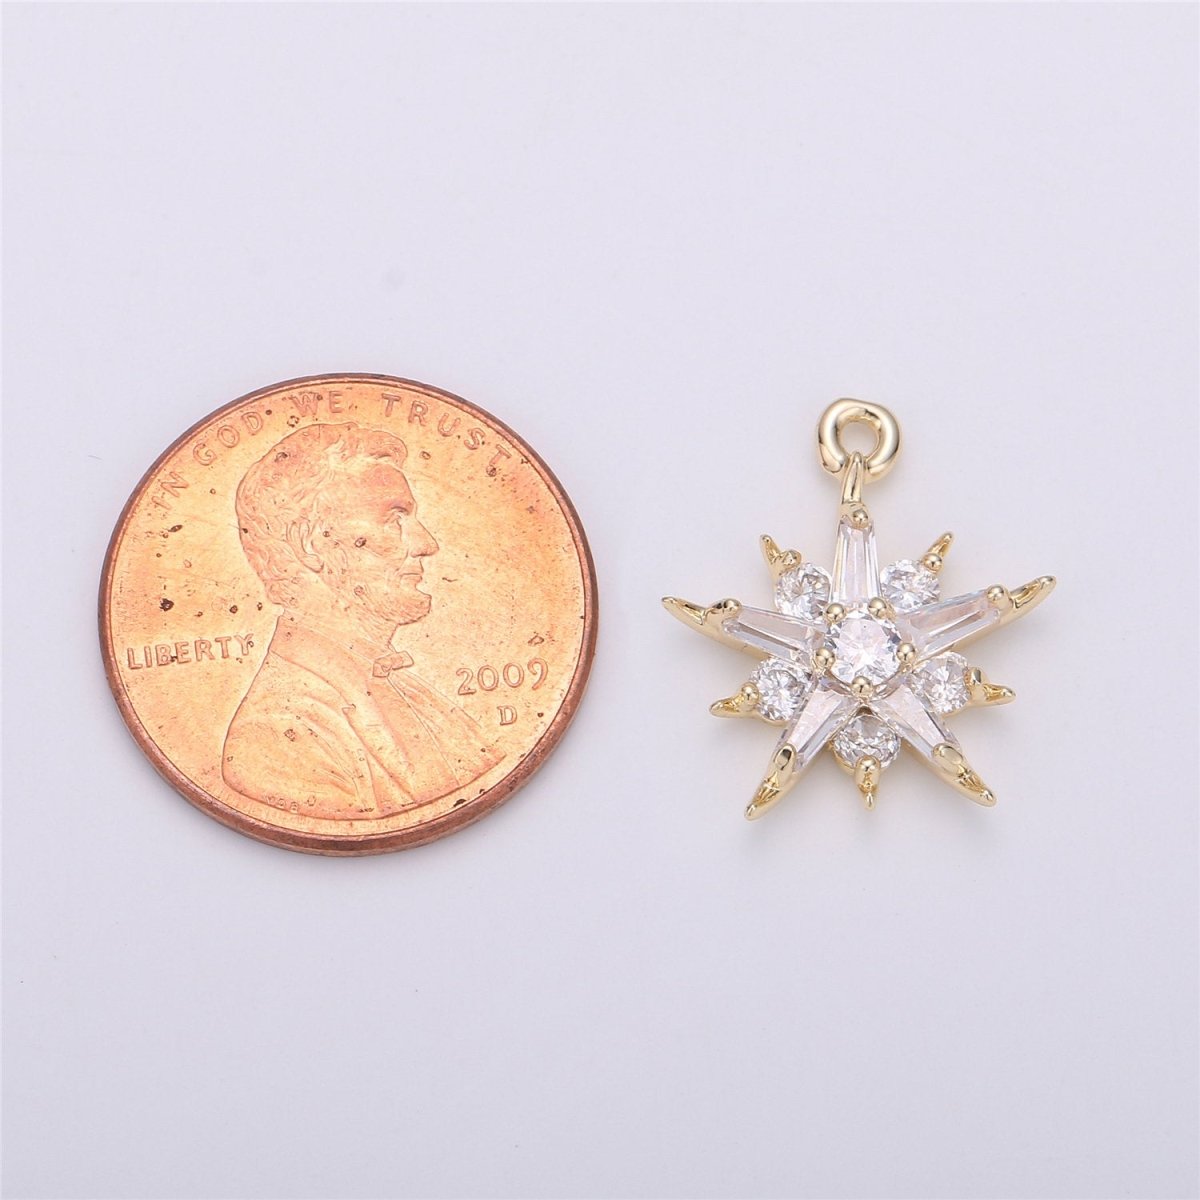 Dainty Baguette Star flower Pendant Charm Pave Snowflake Charm in 14k Gold Filled Charm for Necklace Bracelet Earring Jewelry Making Supply C-522 - DLUXCA